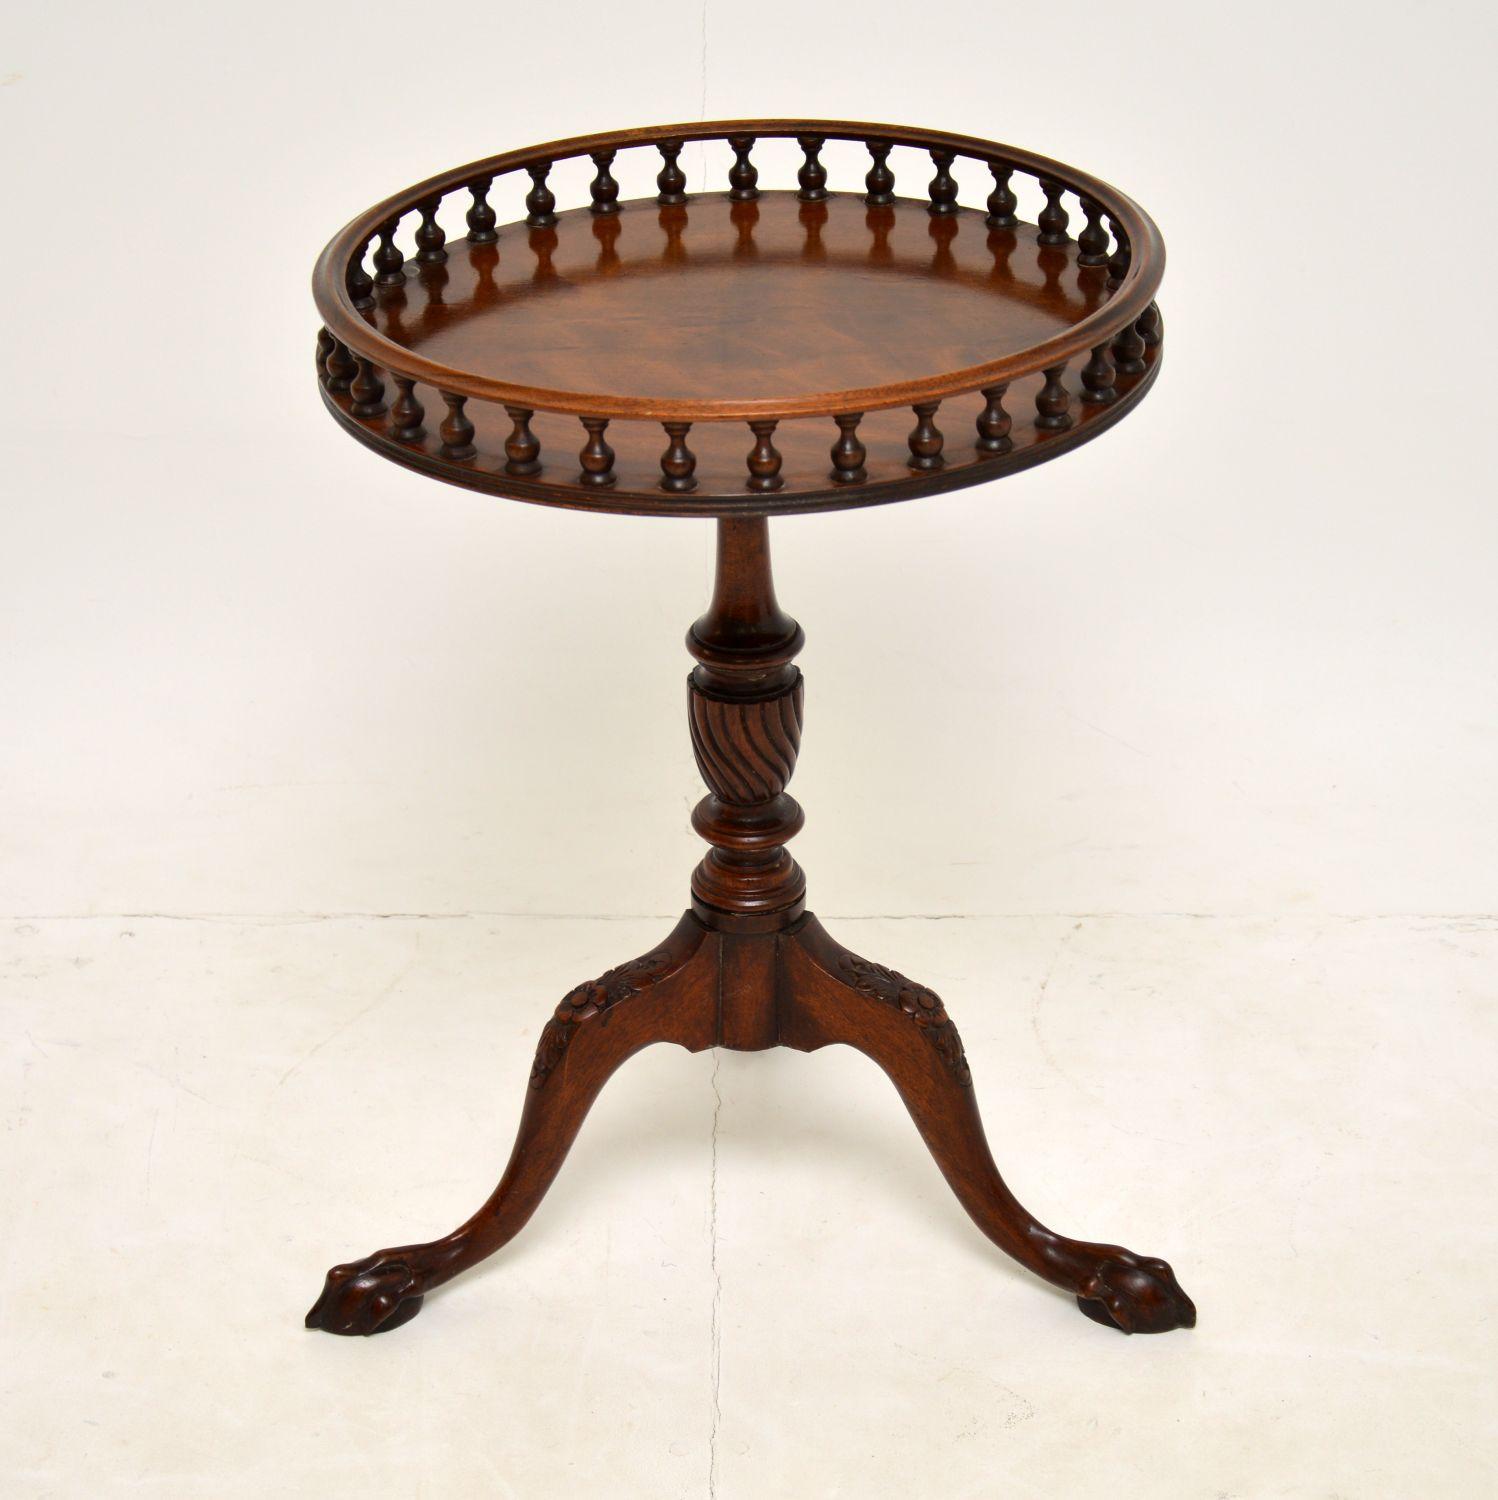 A charming mahogany gallery top side table, in the antique Georgian style. This dates from around the 1930’s & it was made in England.

The quality is excellent, this has a beautifully carved tripod base, with hairy paw feet. The gallery spindles